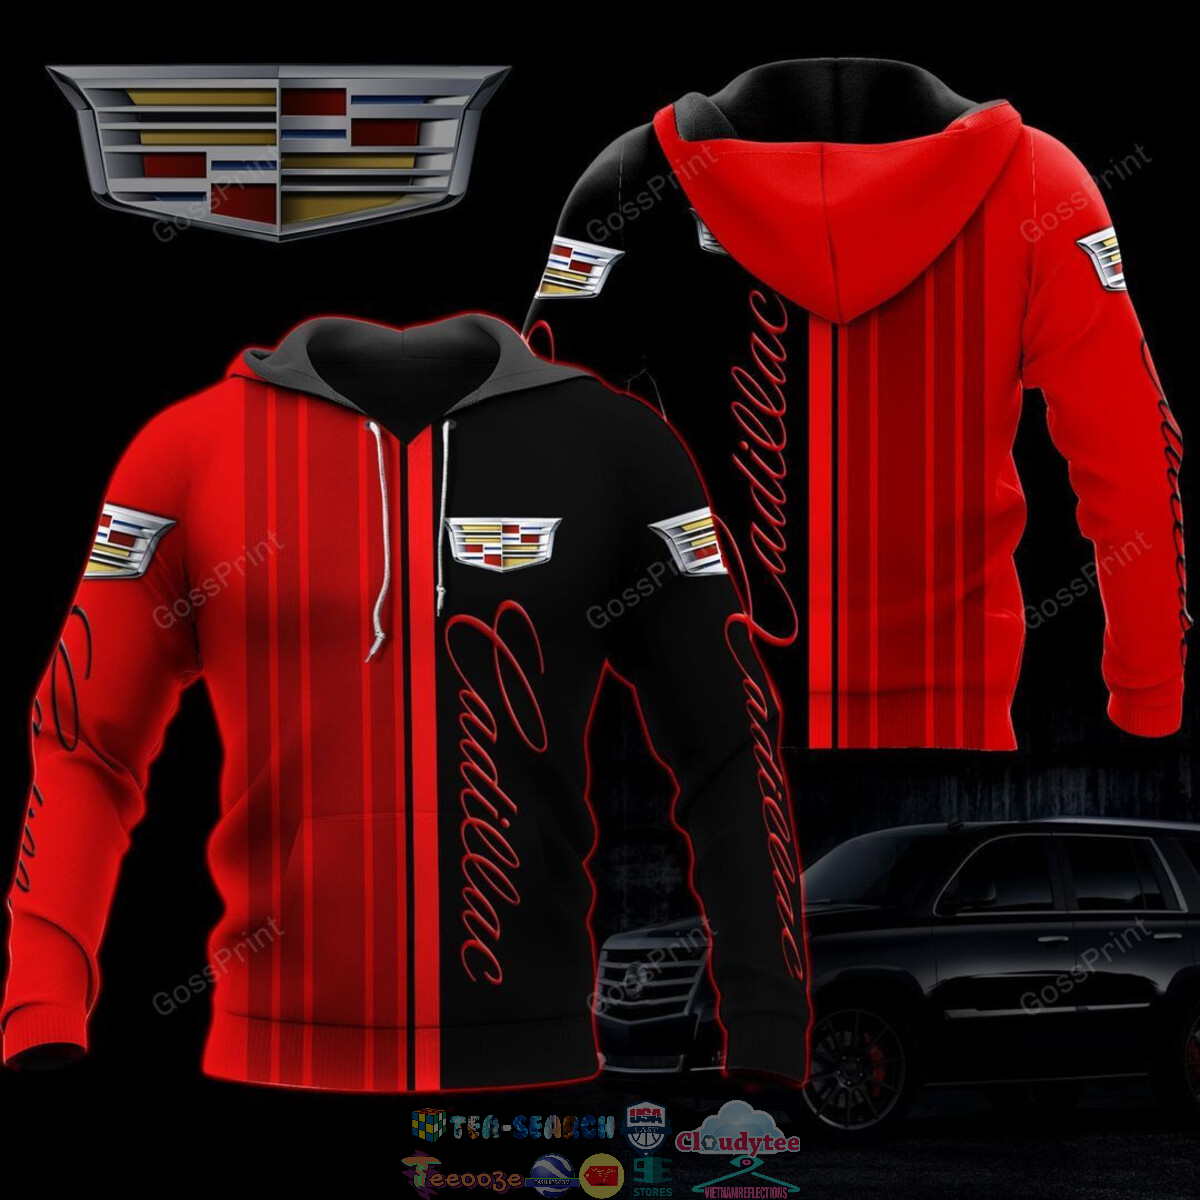 Cadillac ver 3 3D hoodie and t-shirt